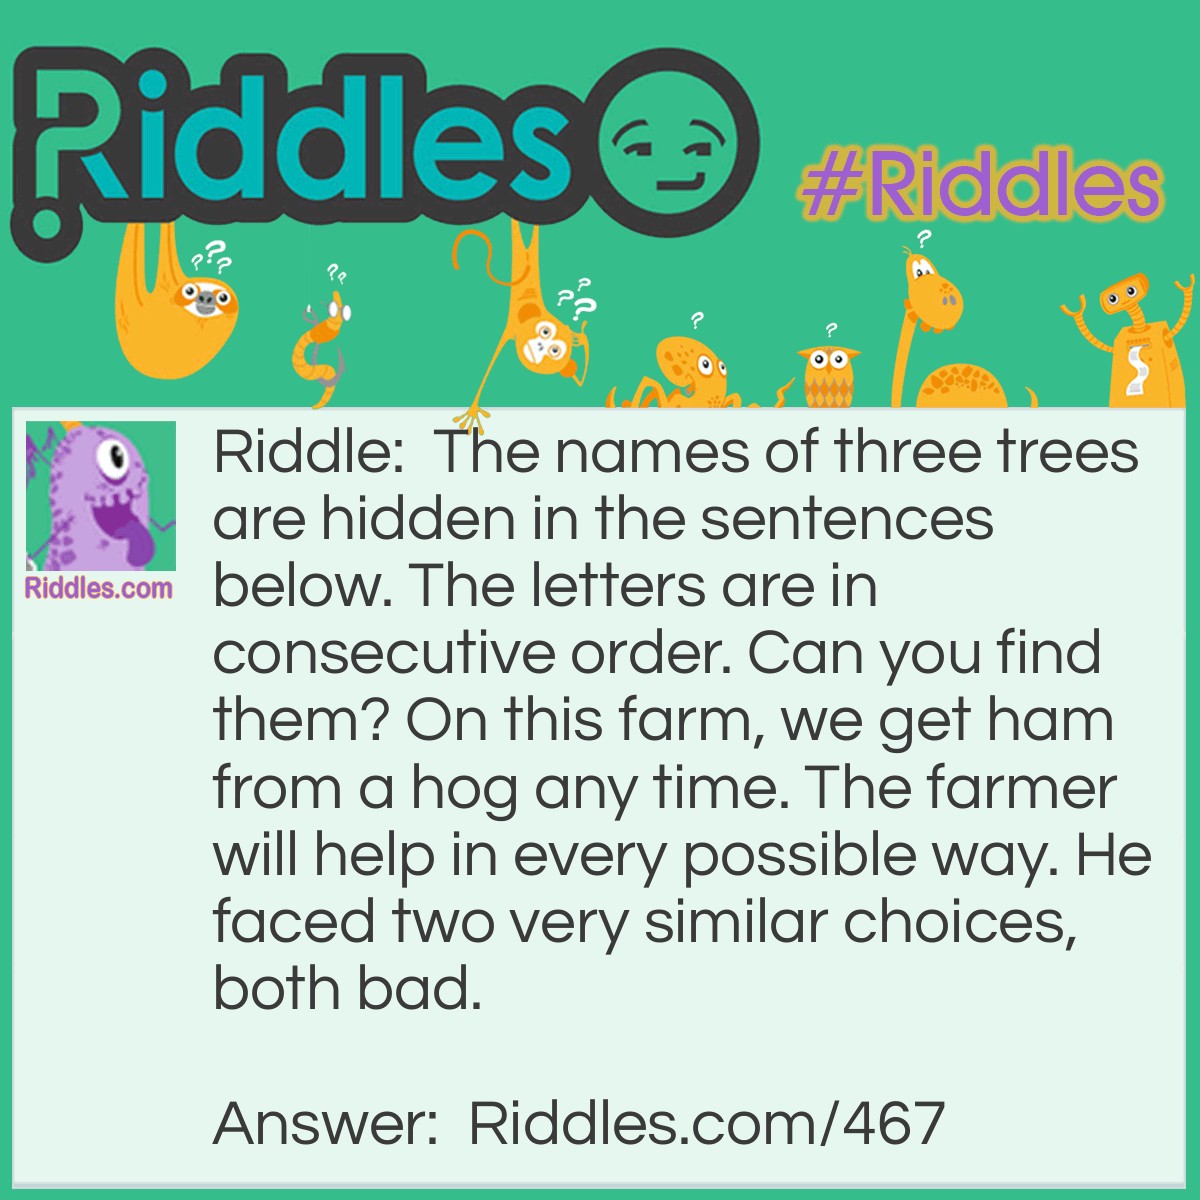 Riddle: The names of three trees are hidden in the sentences below. The letters are in consecutive order. Can you find them? On this farm, we get ham from a hog any time. The farmer will help in every possible way. He faced two very similar choices, both bad. Answer: Mahogany, pine and larch.